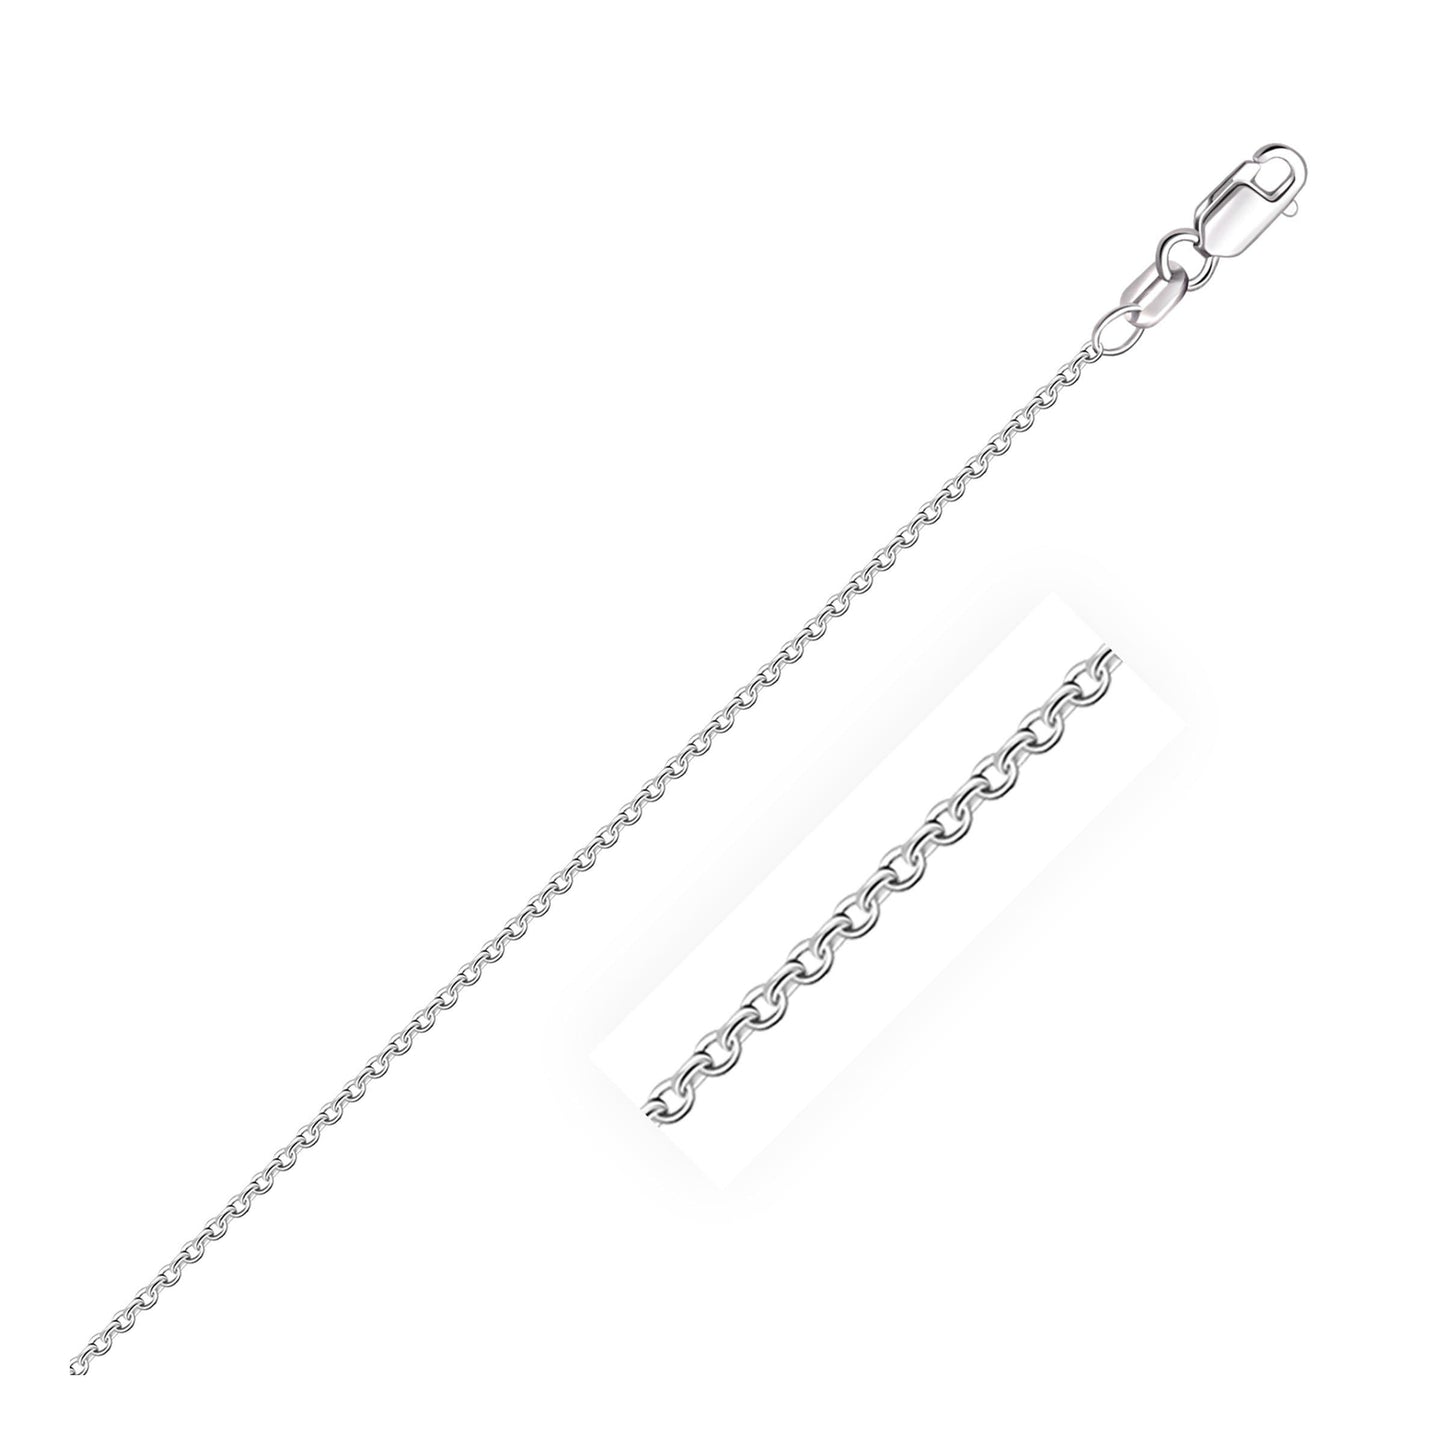 14k White Gold Round Cable Link Chain in 1.5 mm